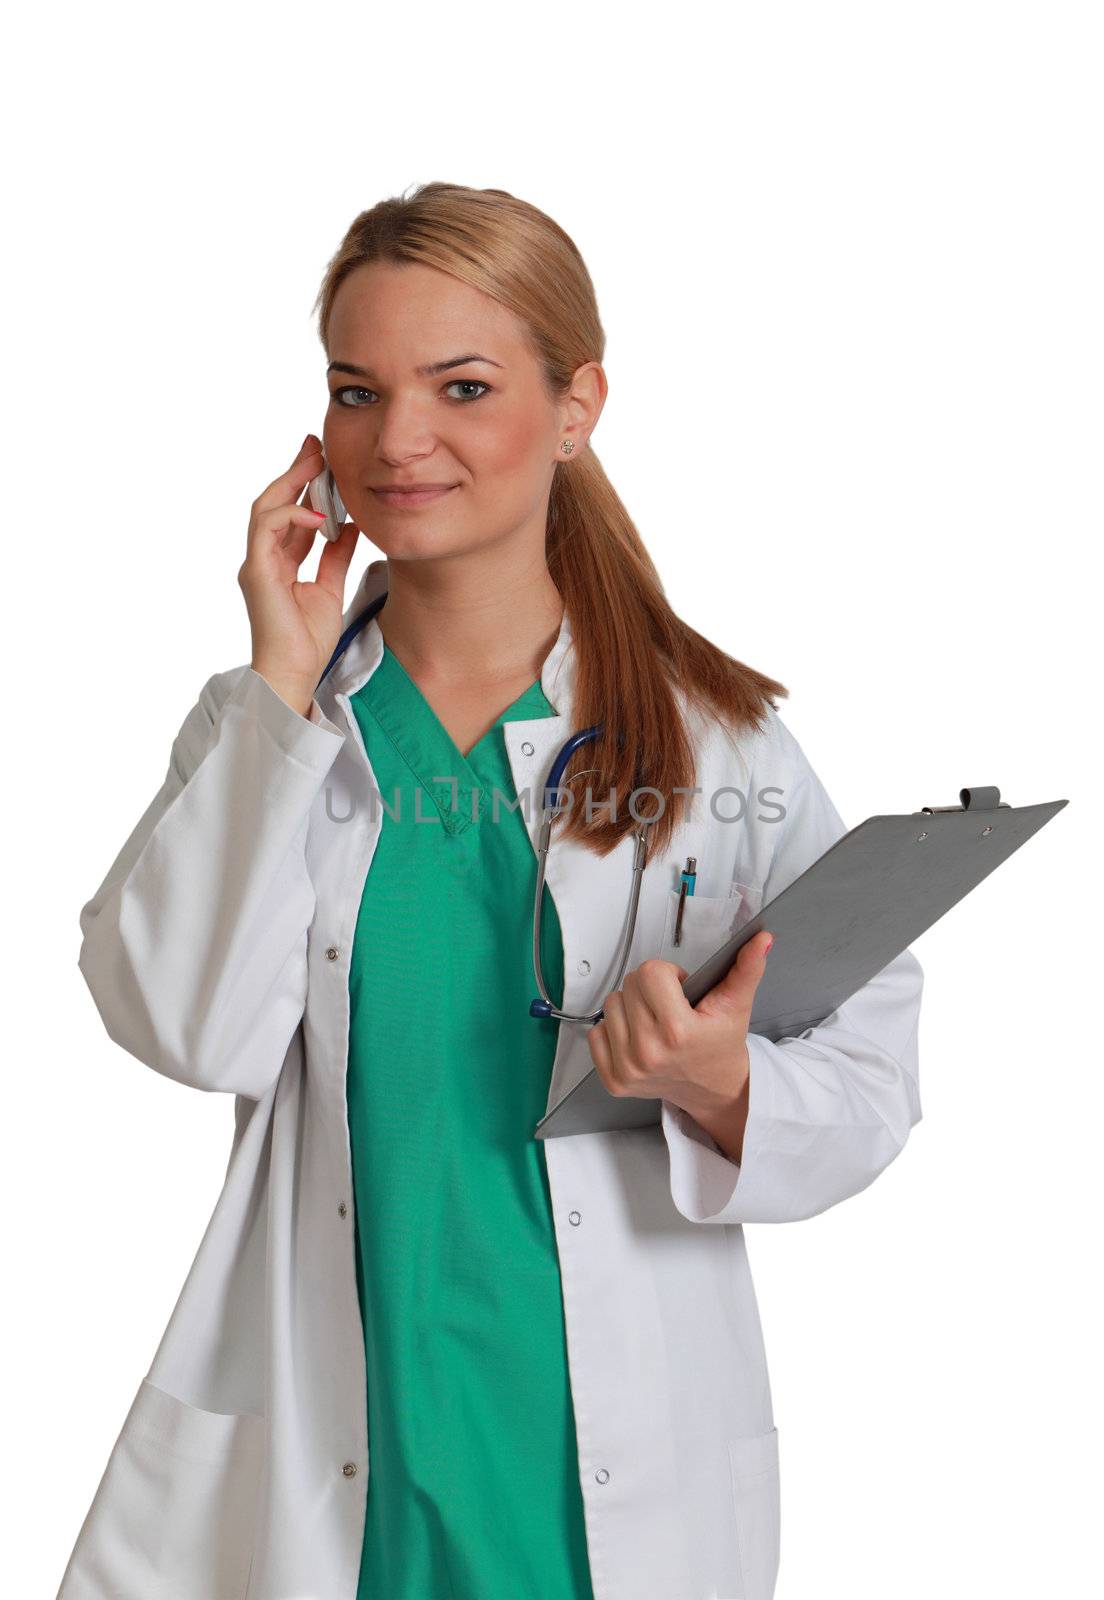 Portrait of a young blonde femeale nurse with clipboard using a mobile phone,isolated against a white background.